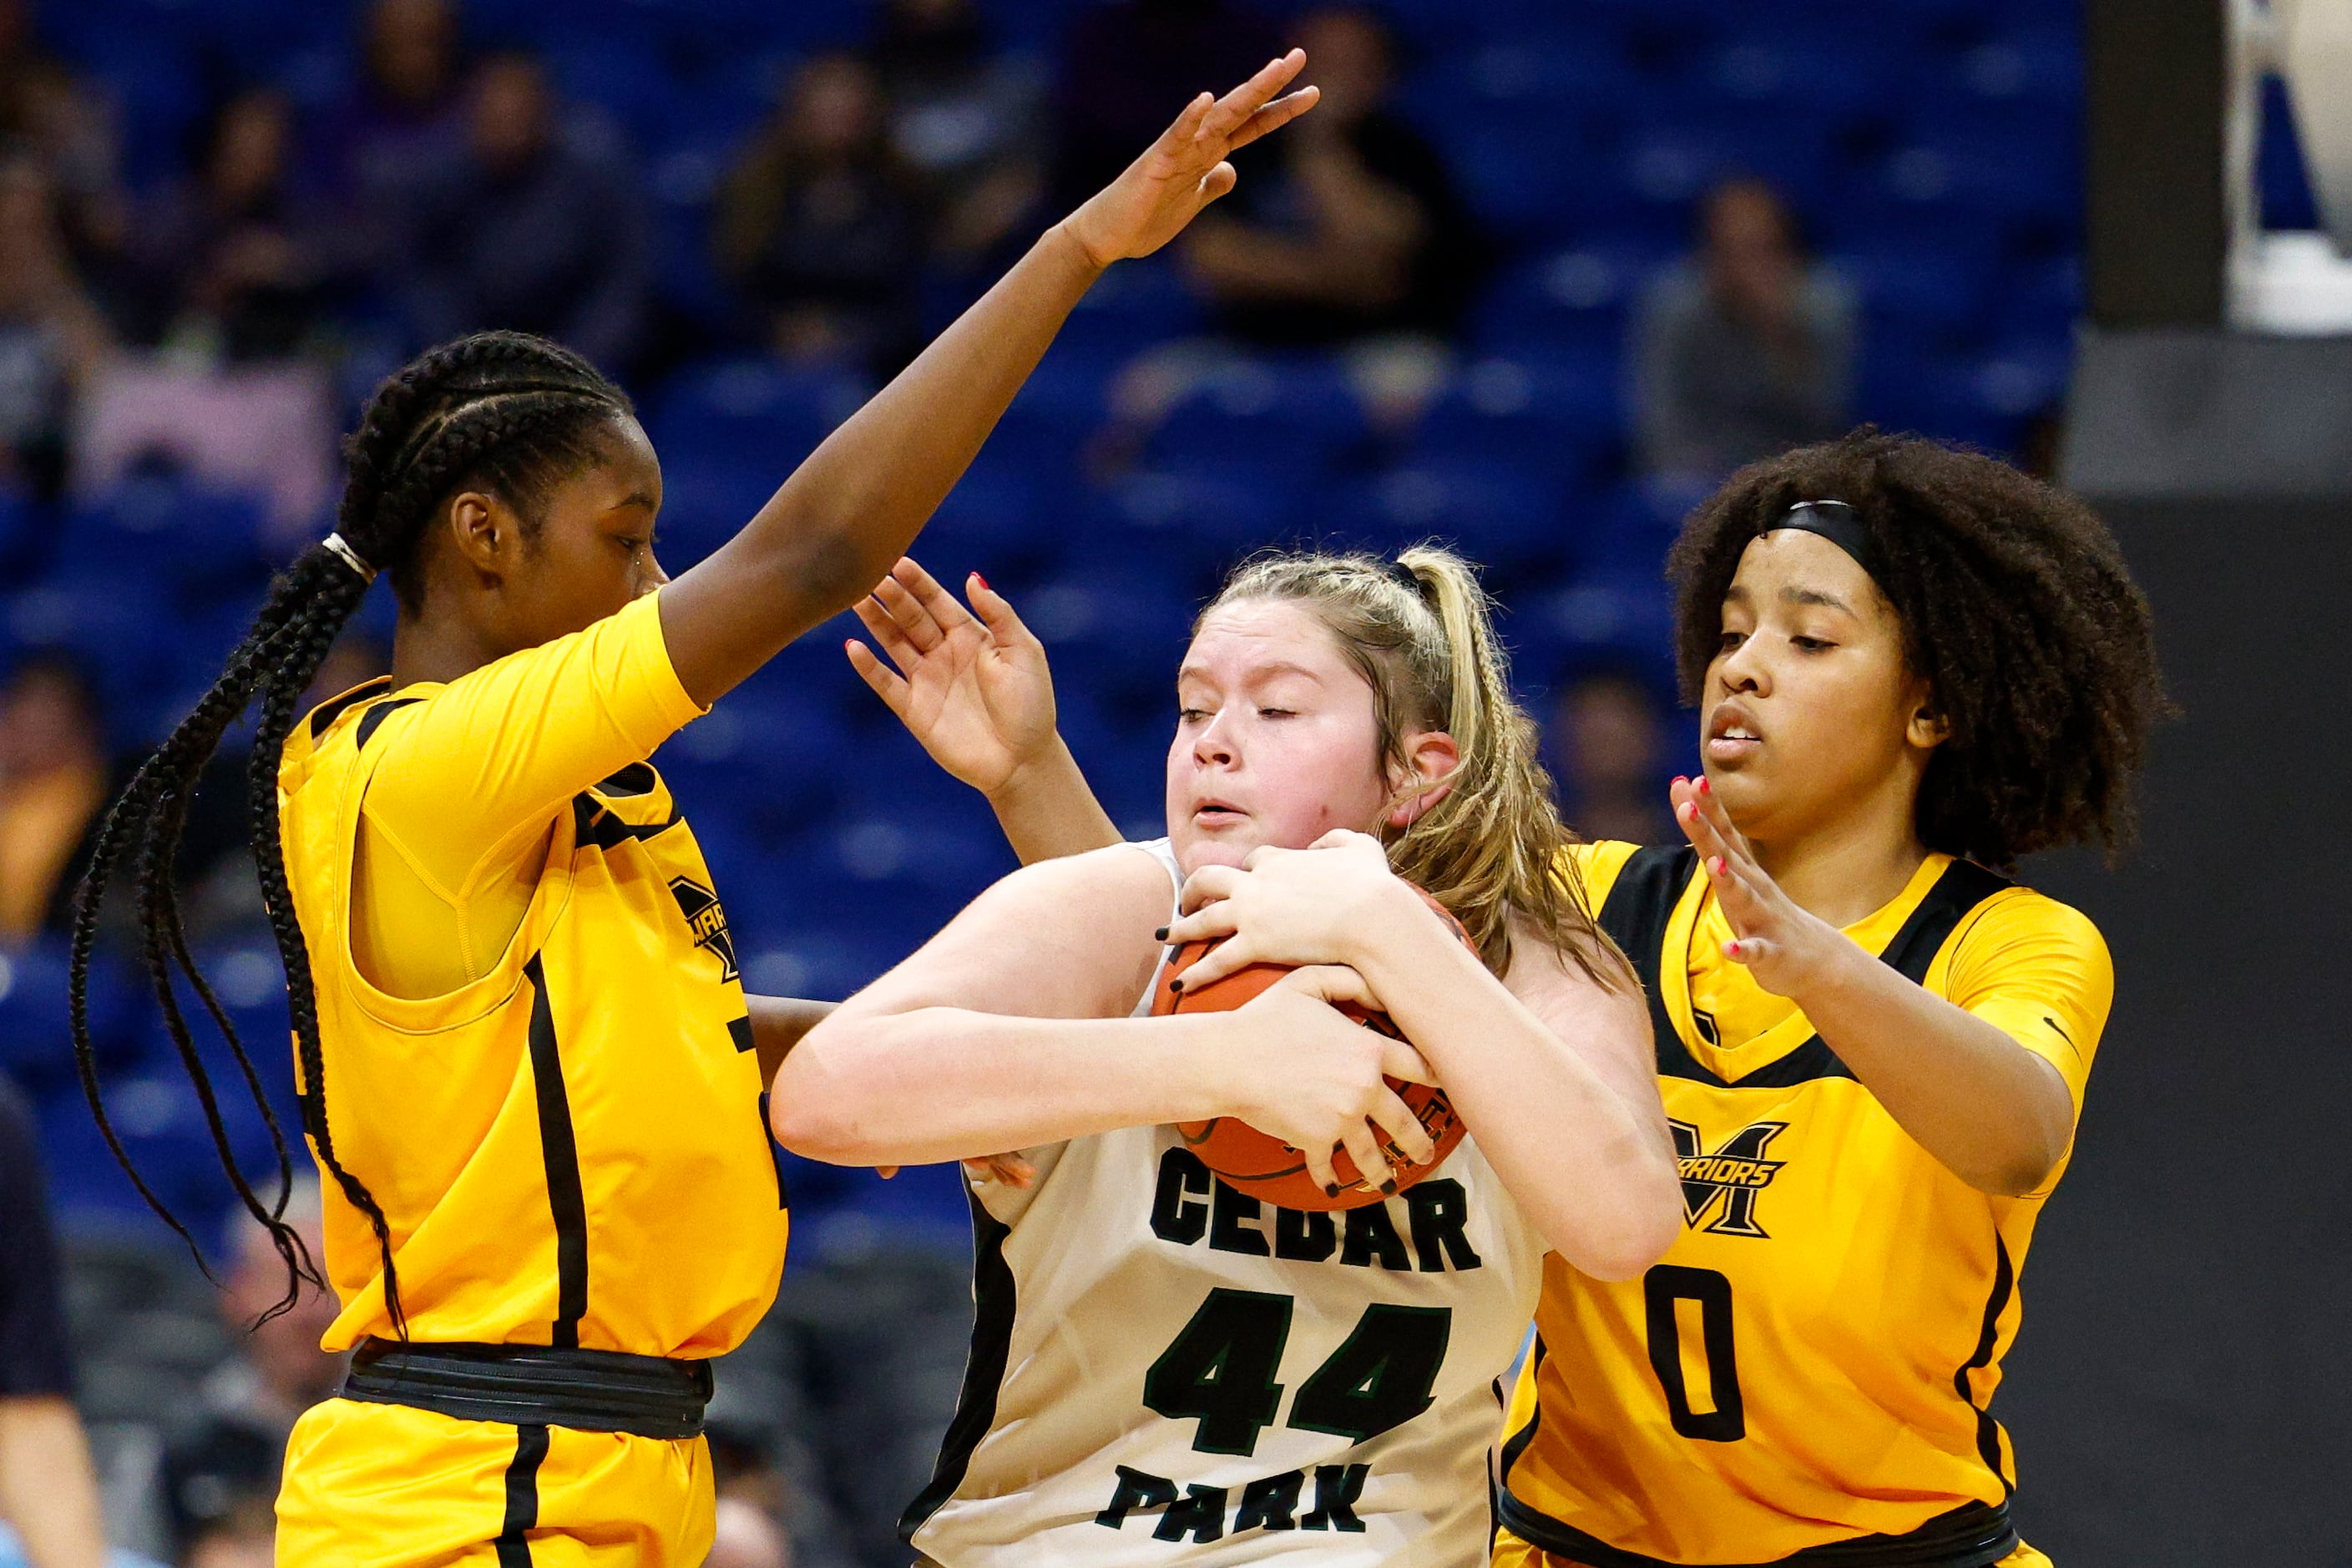 Frisco Memorial guard Brynn Lusby (0) and Frisco Memorial guard Makayla Vation (25) trap...